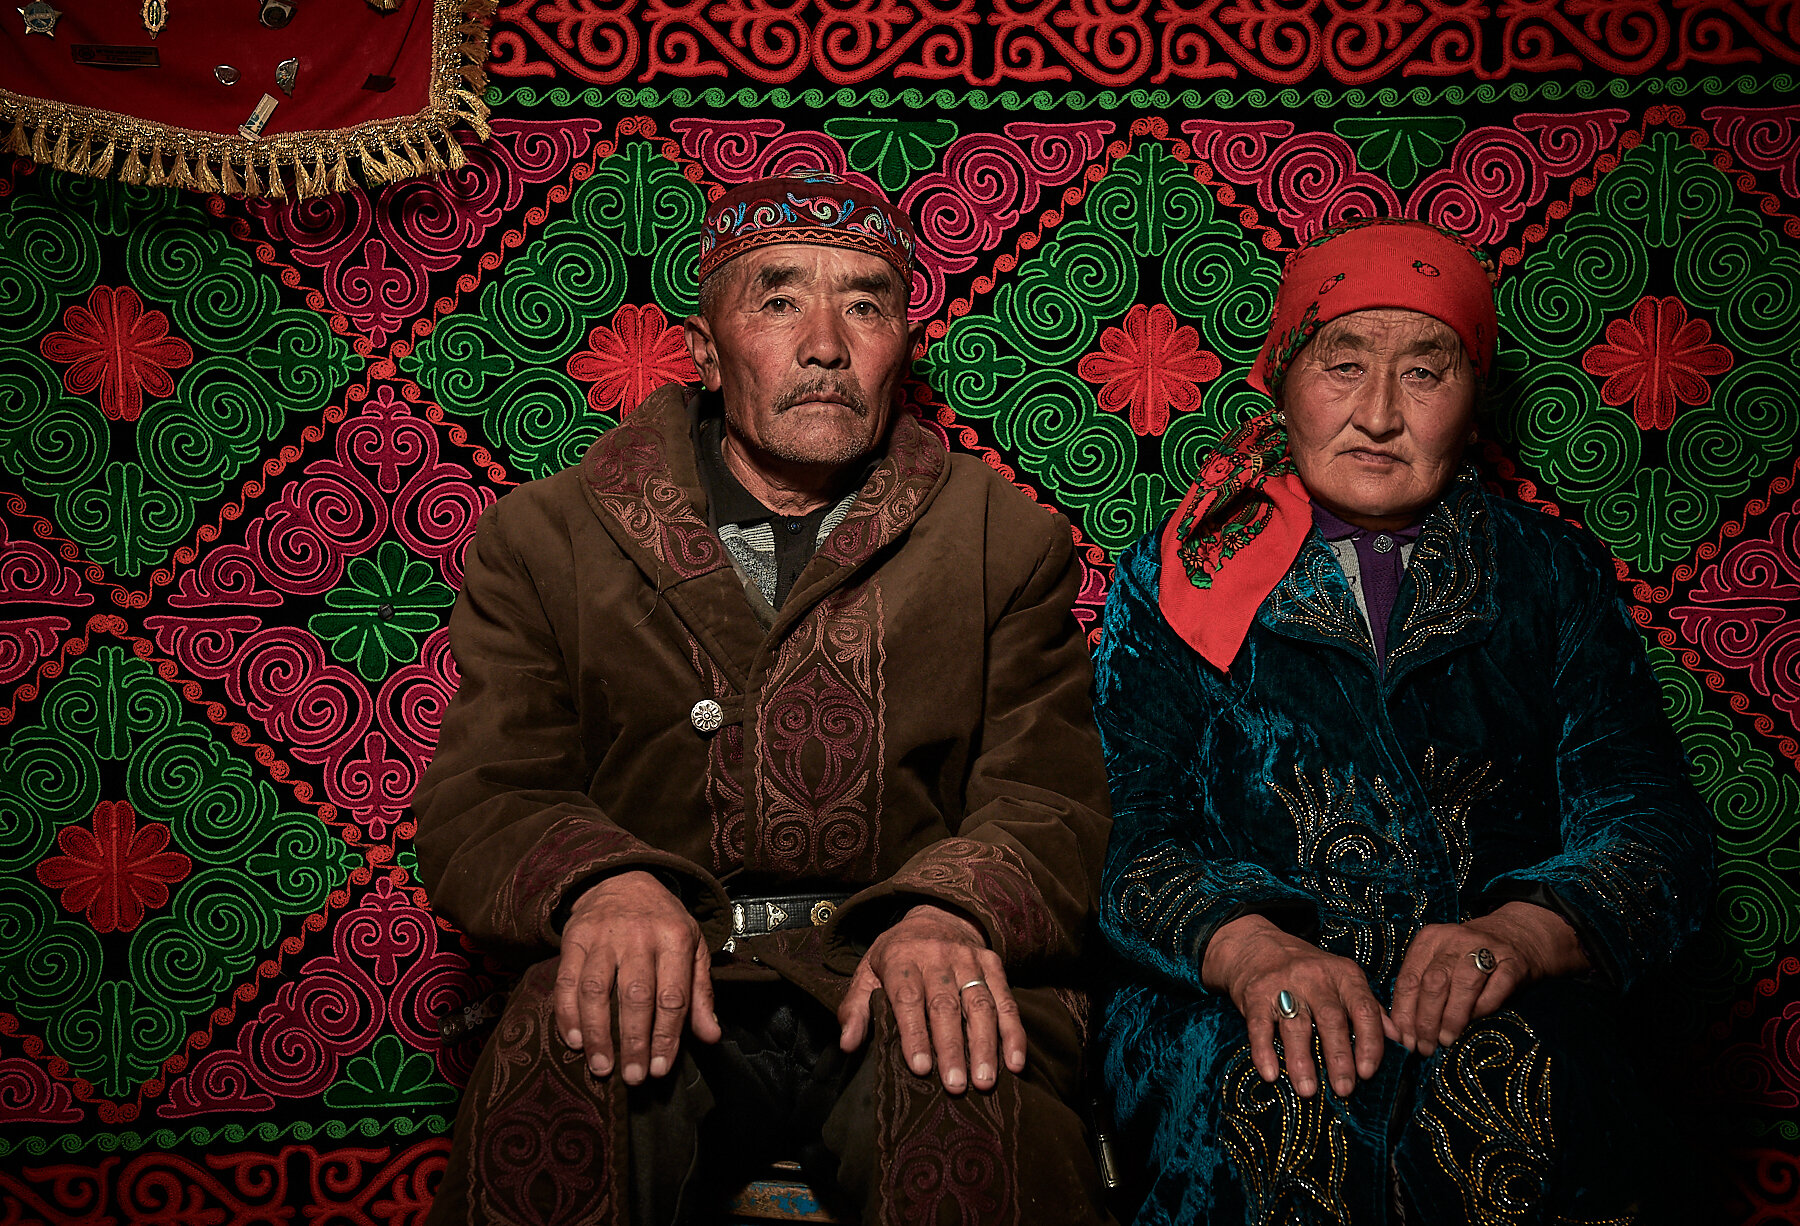 Asker and his wife, eagle hunter family